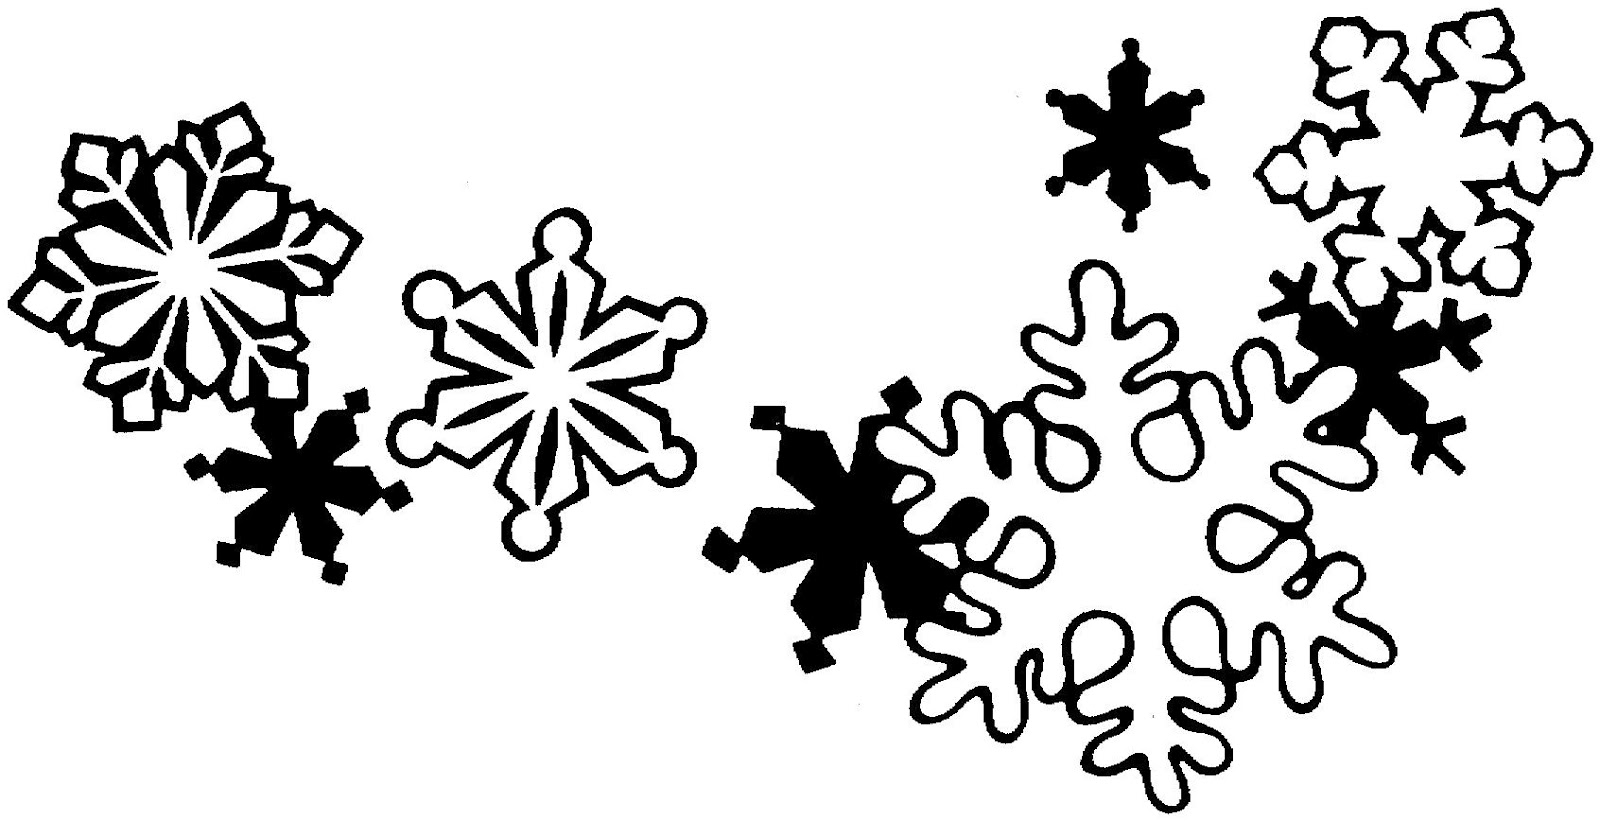 Christmas Clip Art Borders Black And White Images  Pictures - Becuo